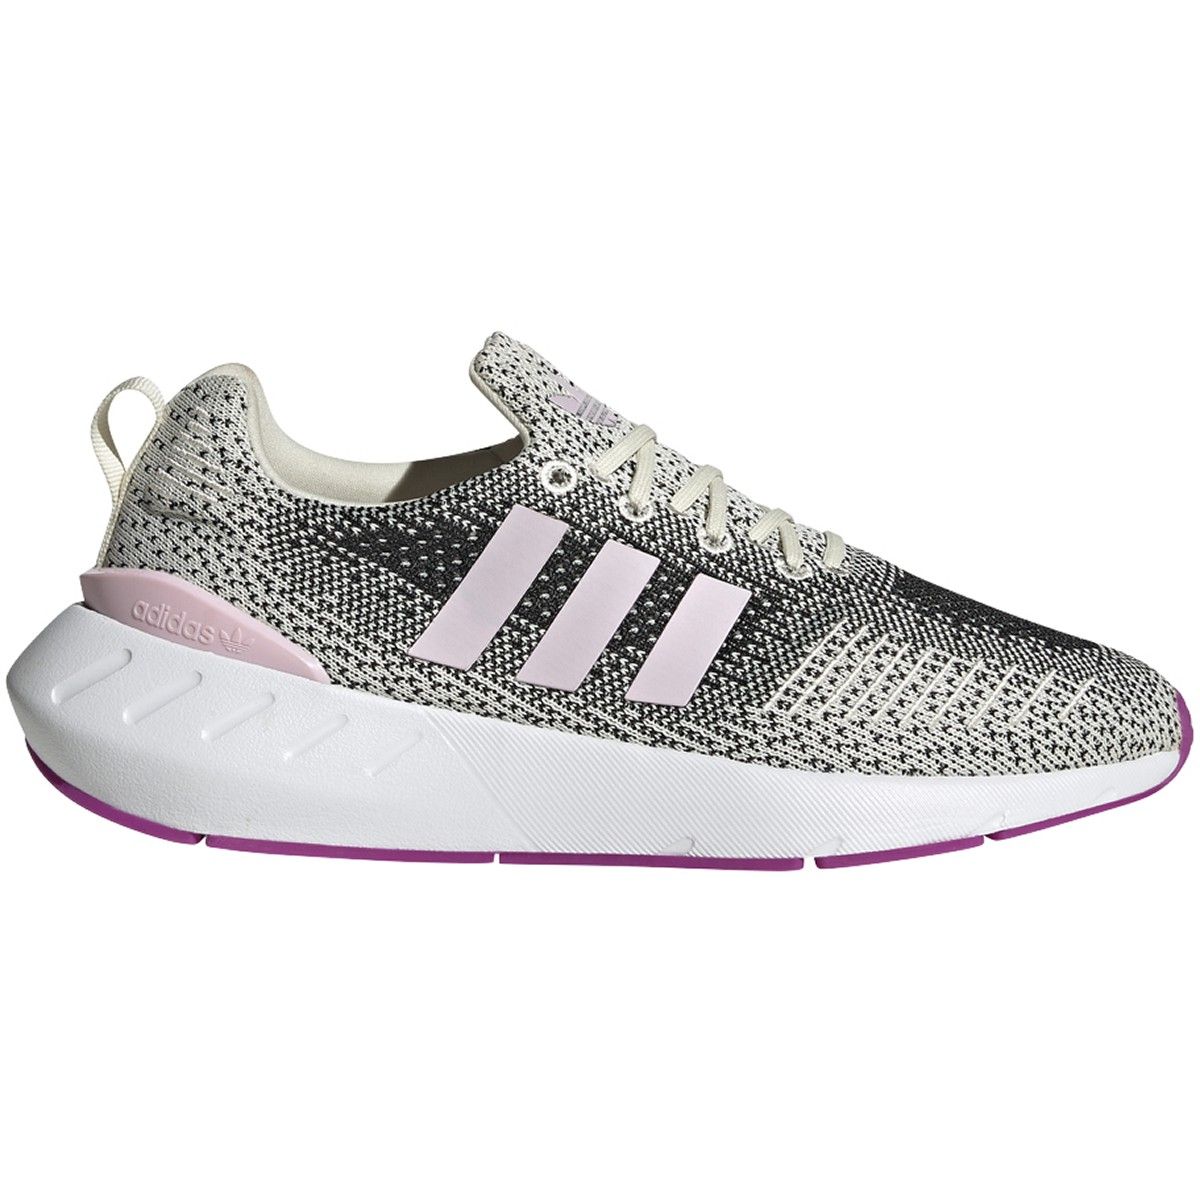 Detector visitante prometedor adidas Swift Run 22 Womens Wide Running Shoes with Gradient | GV7979